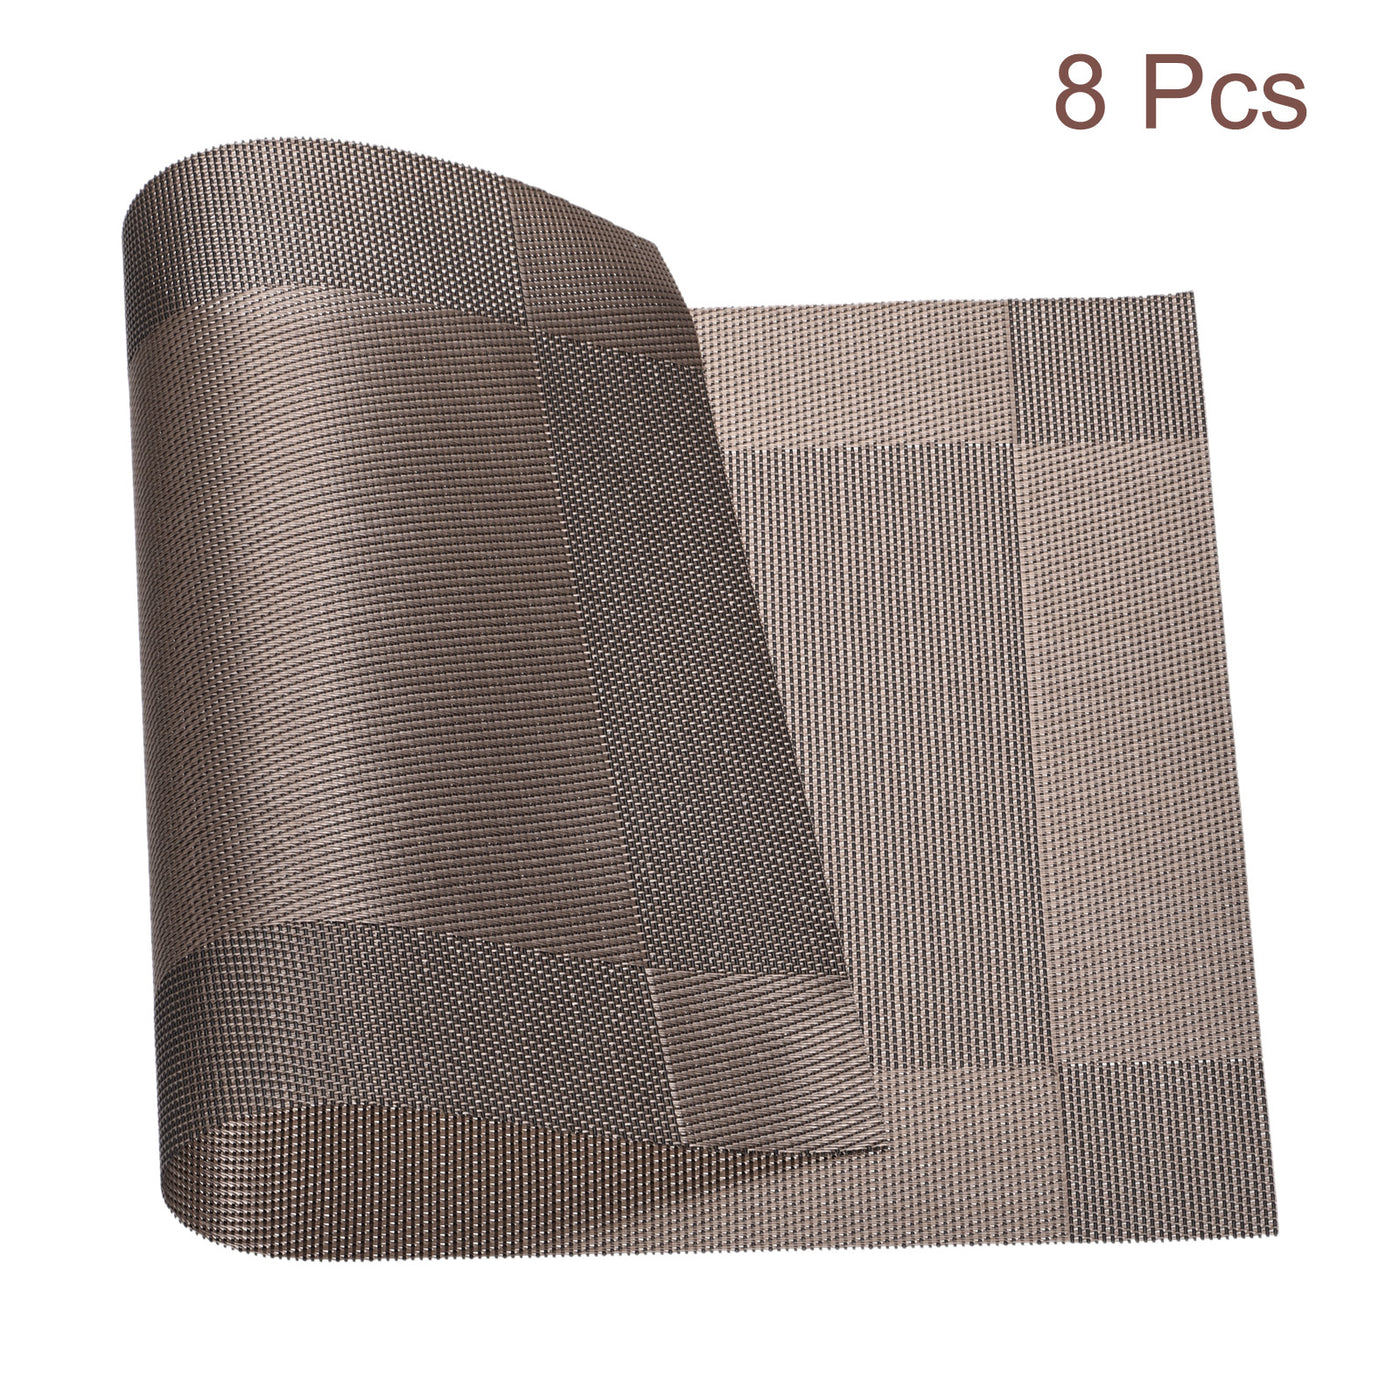 uxcell Uxcell Place Mats 450x300mm 8pcs PVC Table Washable Woven Placemat, Coffee